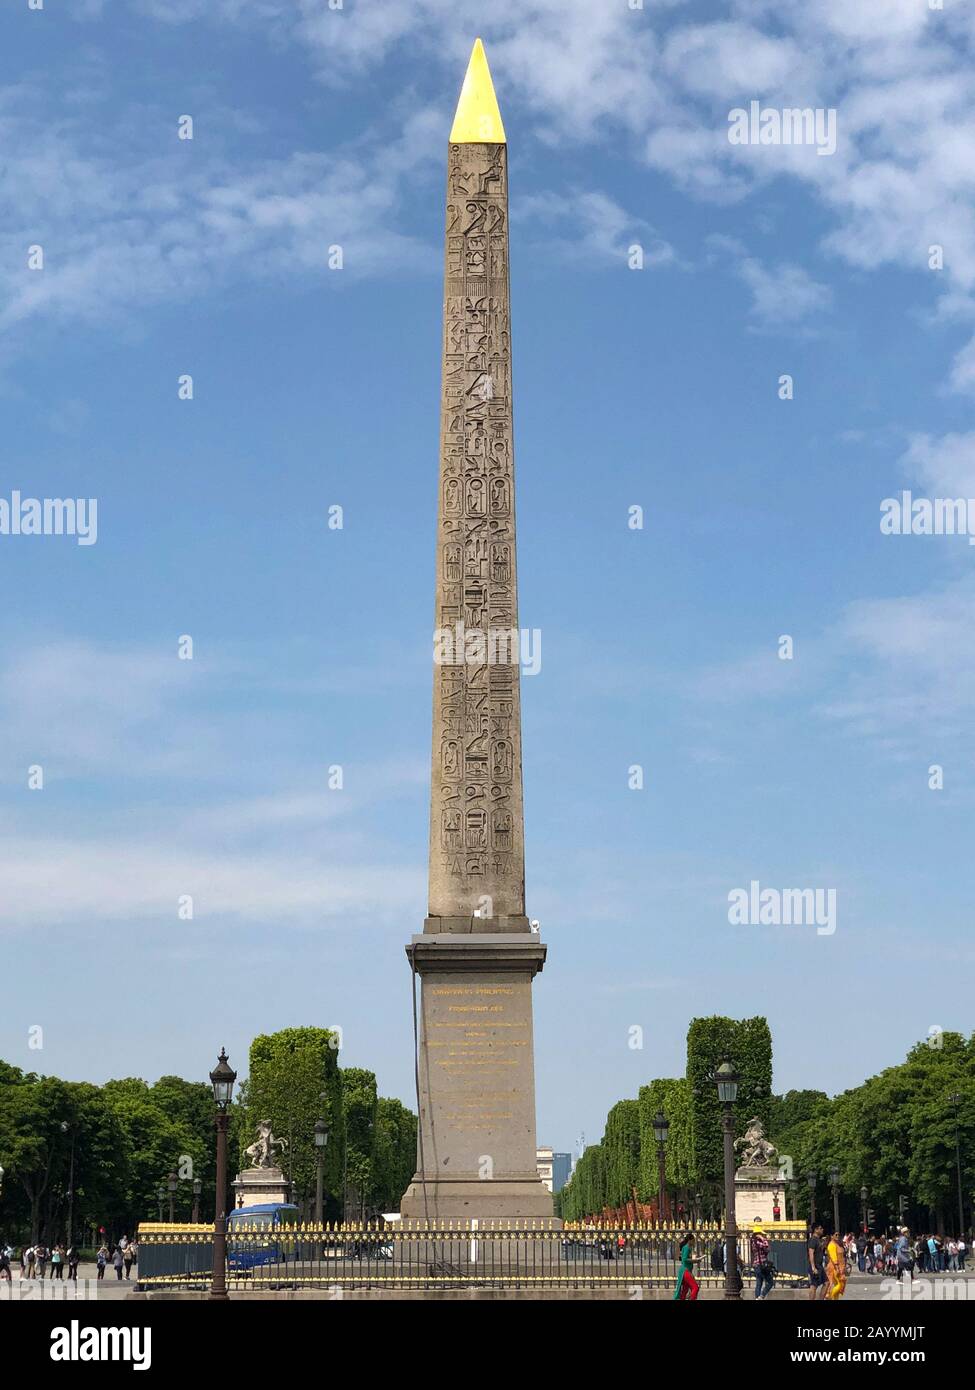 Egyptian Obelisk of Luxor Standing at the Center of the Place de la Concorde in Paris, France Stock Photo